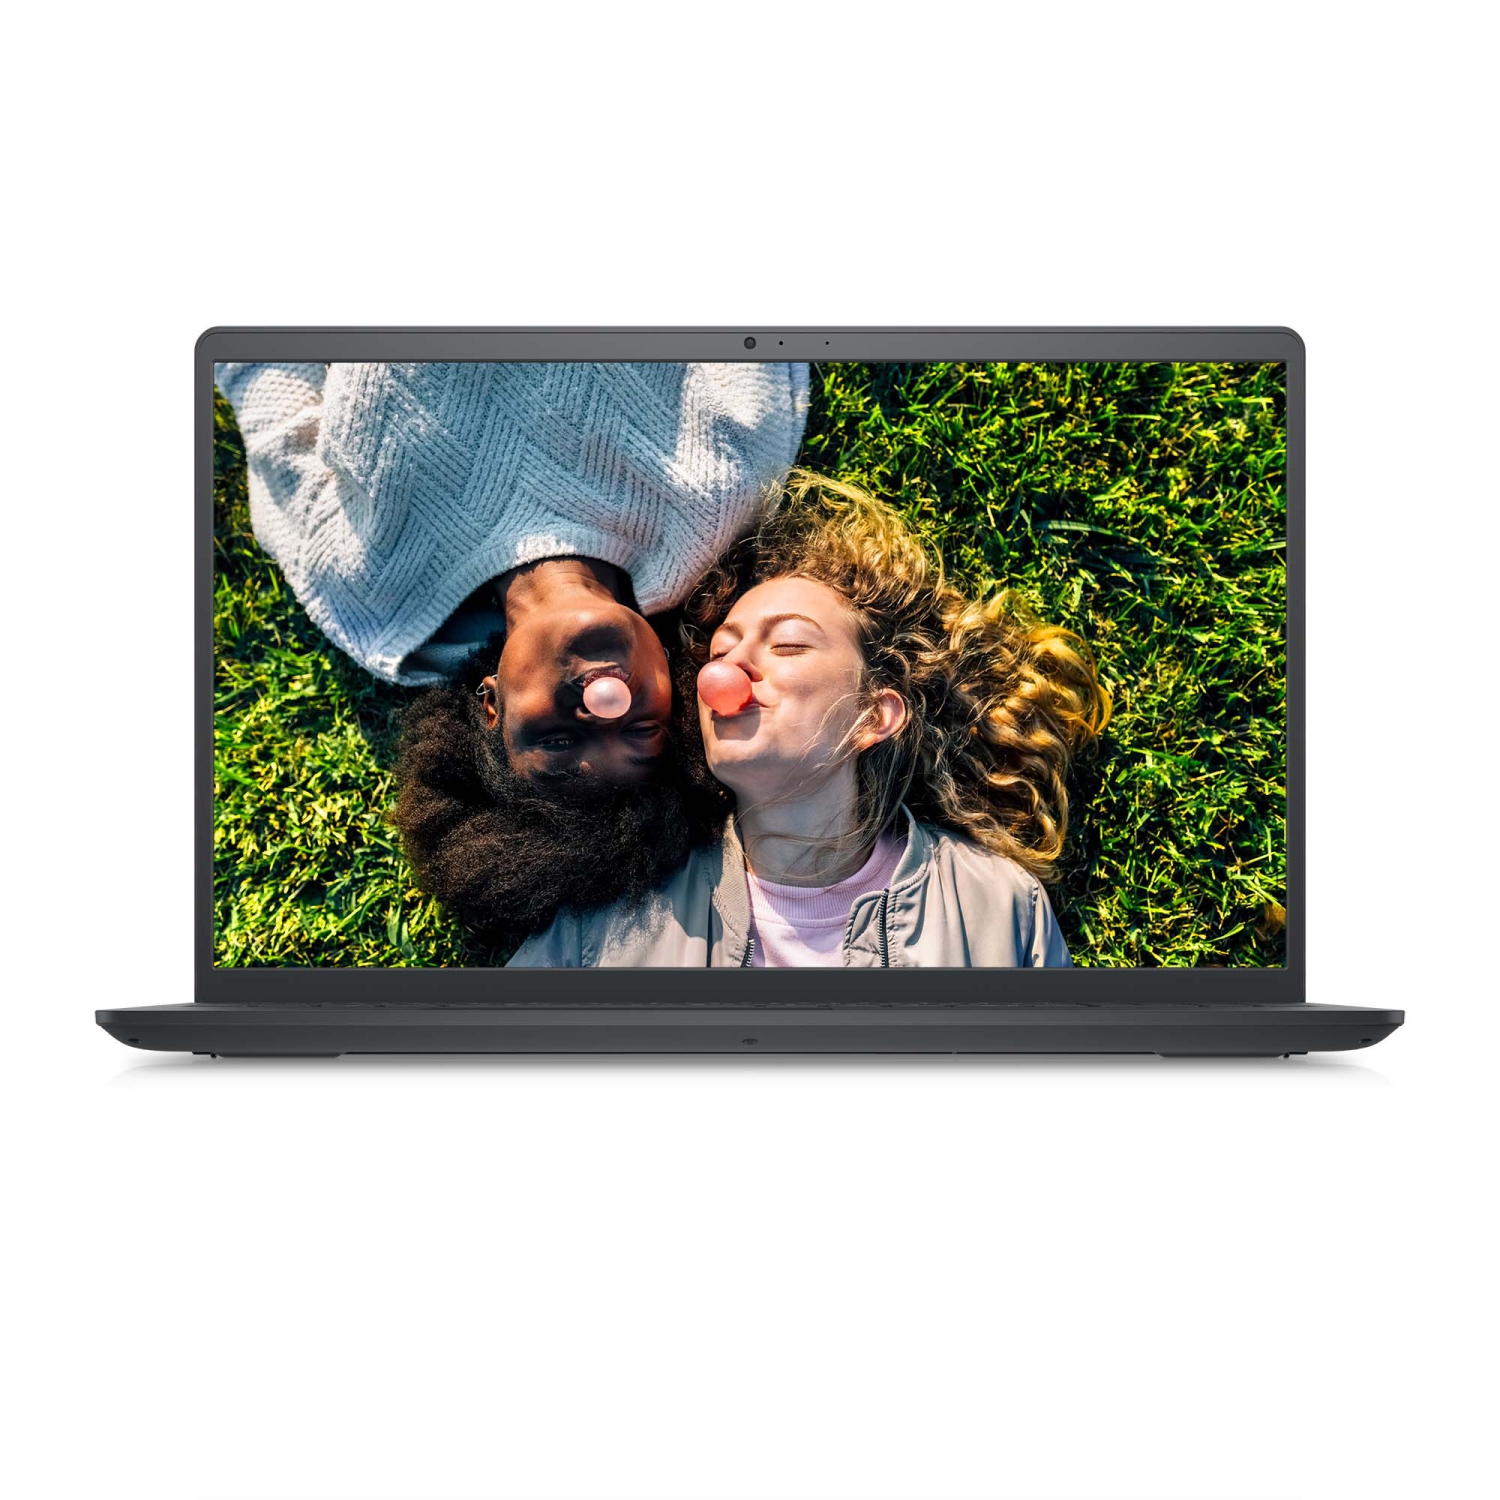 Dell Inspiron 15 3520 15.6" Laptop with 12th Gen Intel® Core™ i5-1235U, 512 GB SSD, and 16 GB DDR4 RAM in Carbon Black